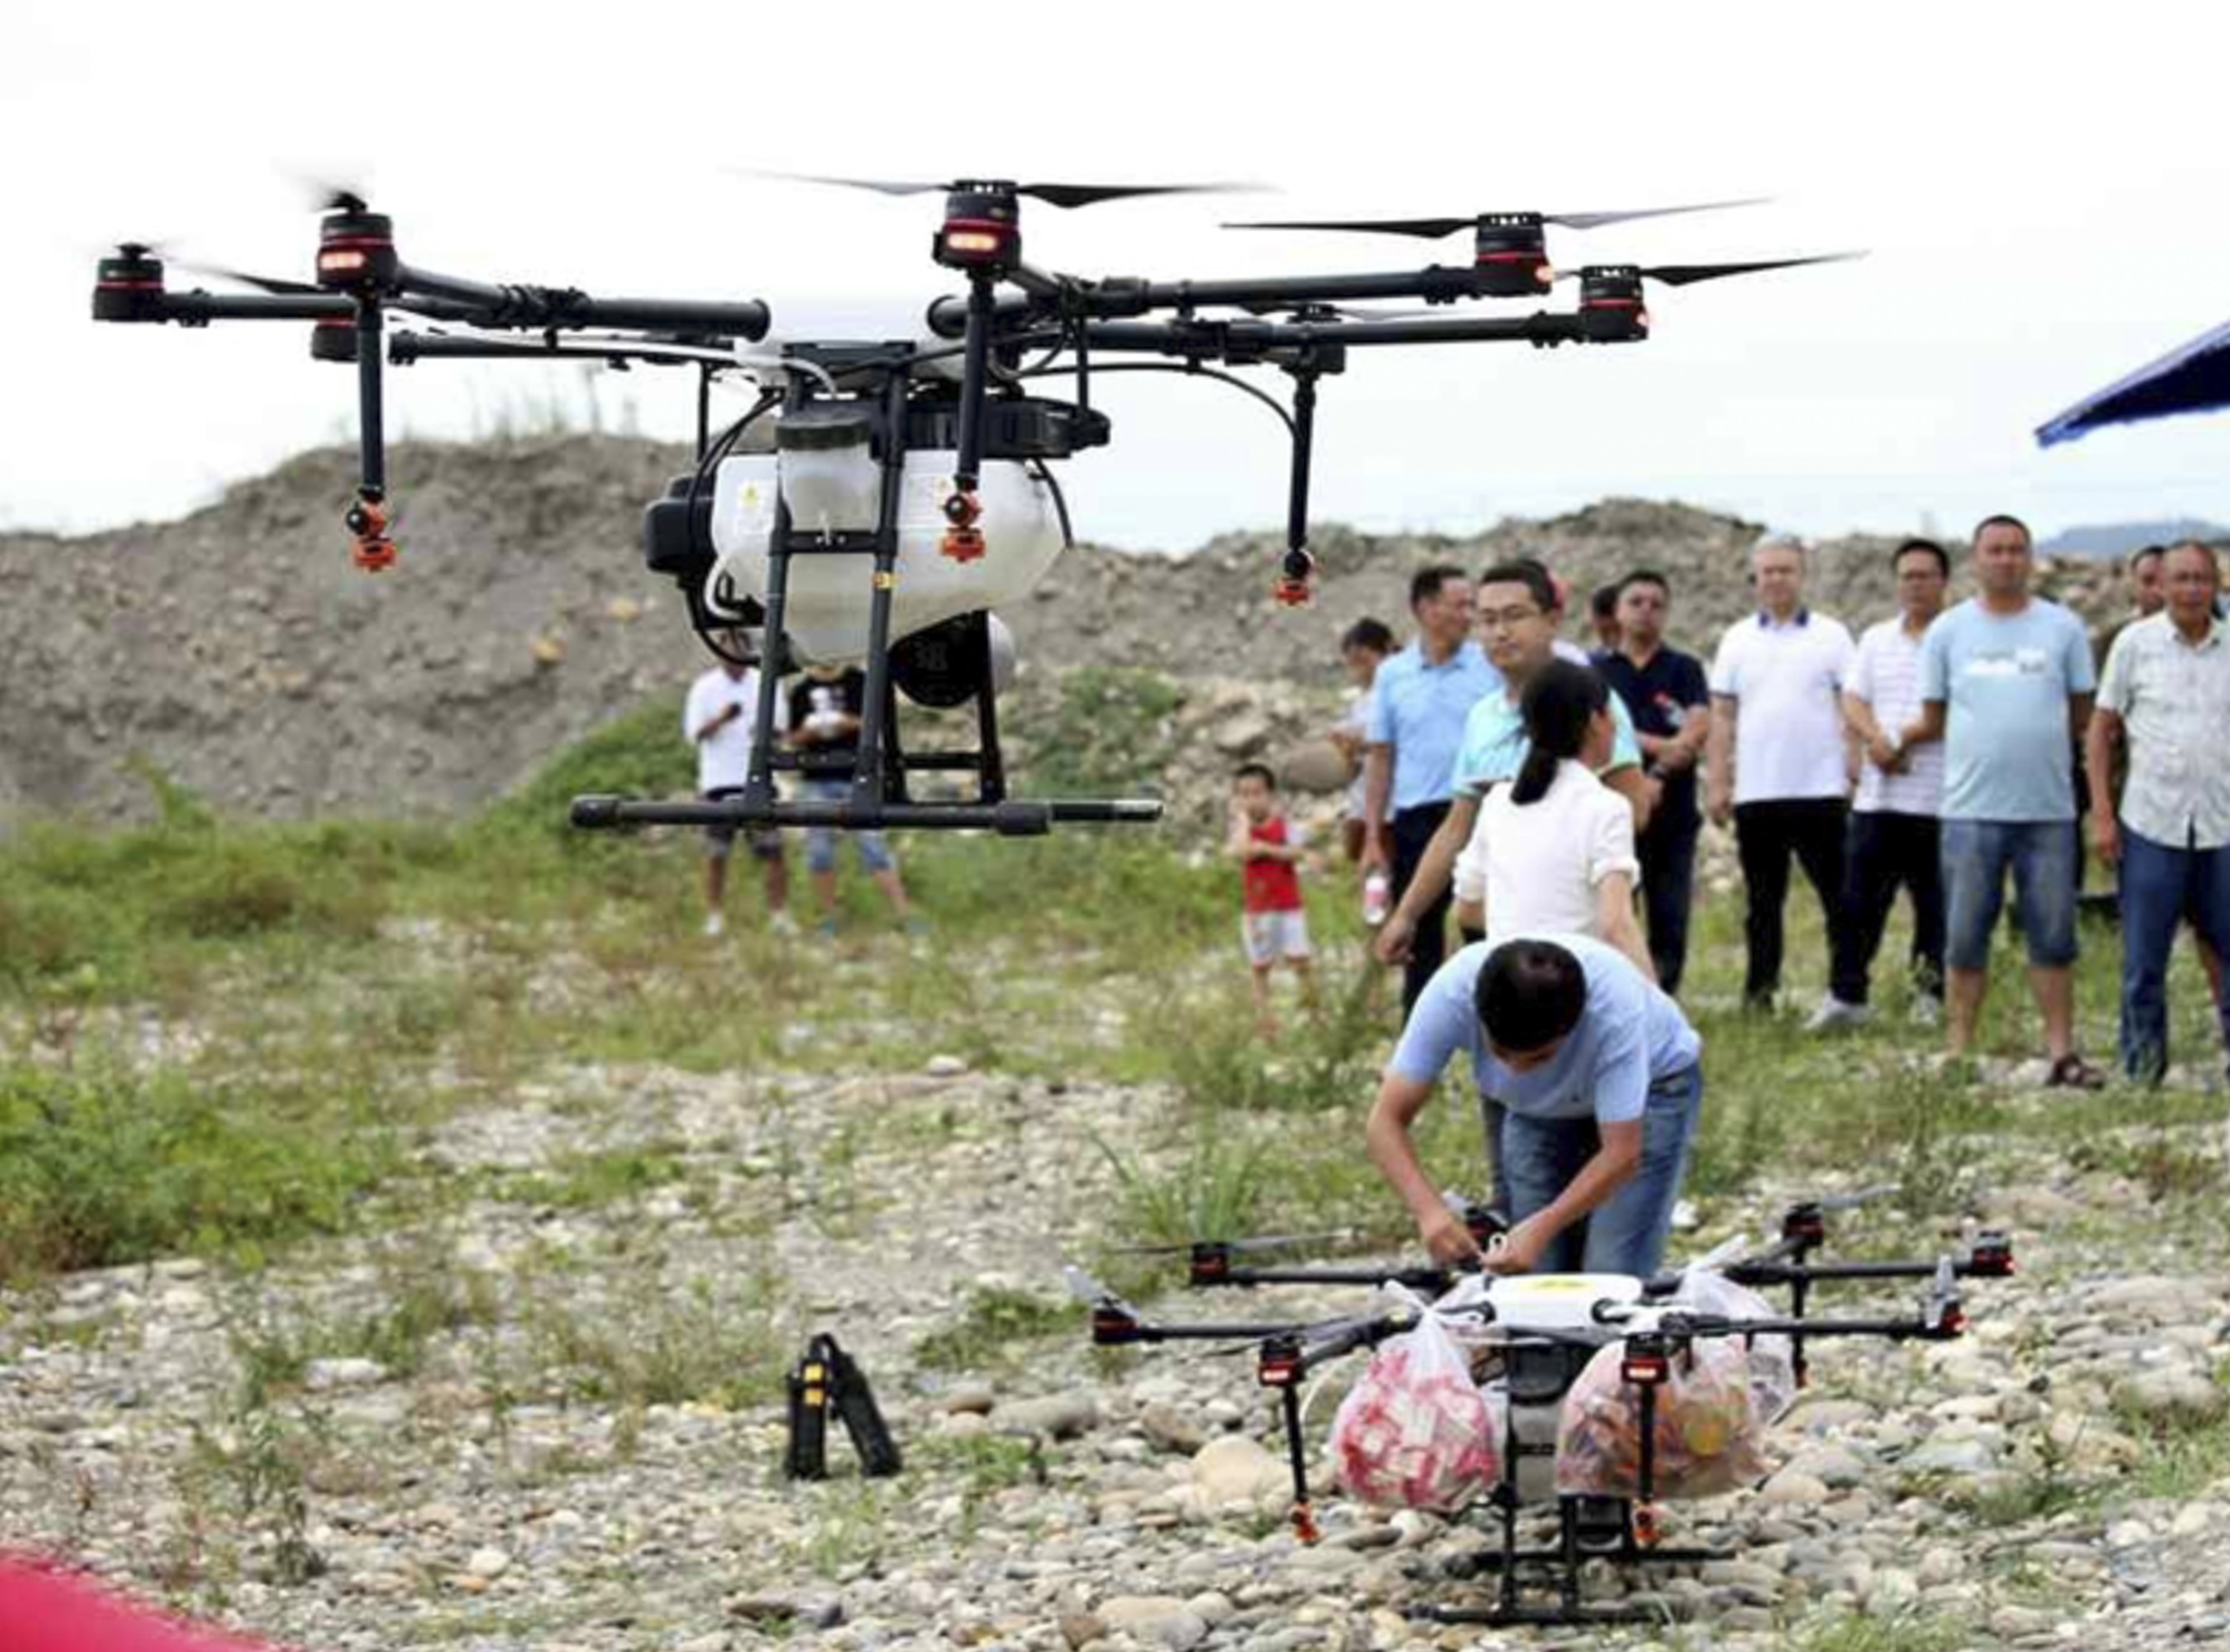 Onlookers watch the drones being loaded with supplies. Photo: scol.com.cn